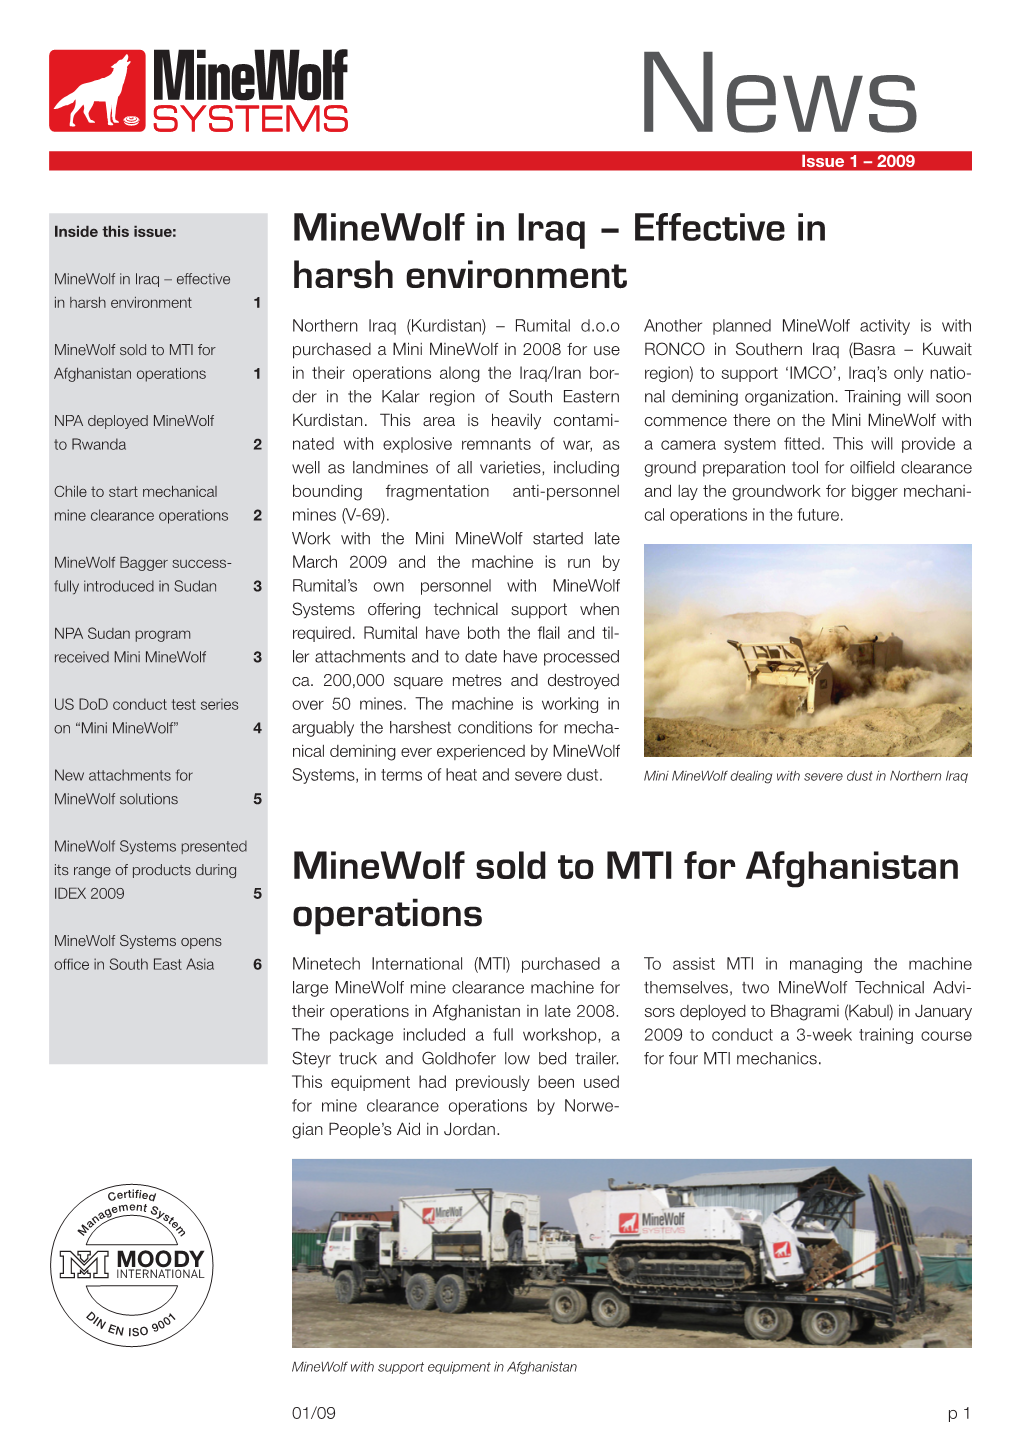 Effective in Harsh Environment Minewolf Sold to MTI for Afghanistan Operations